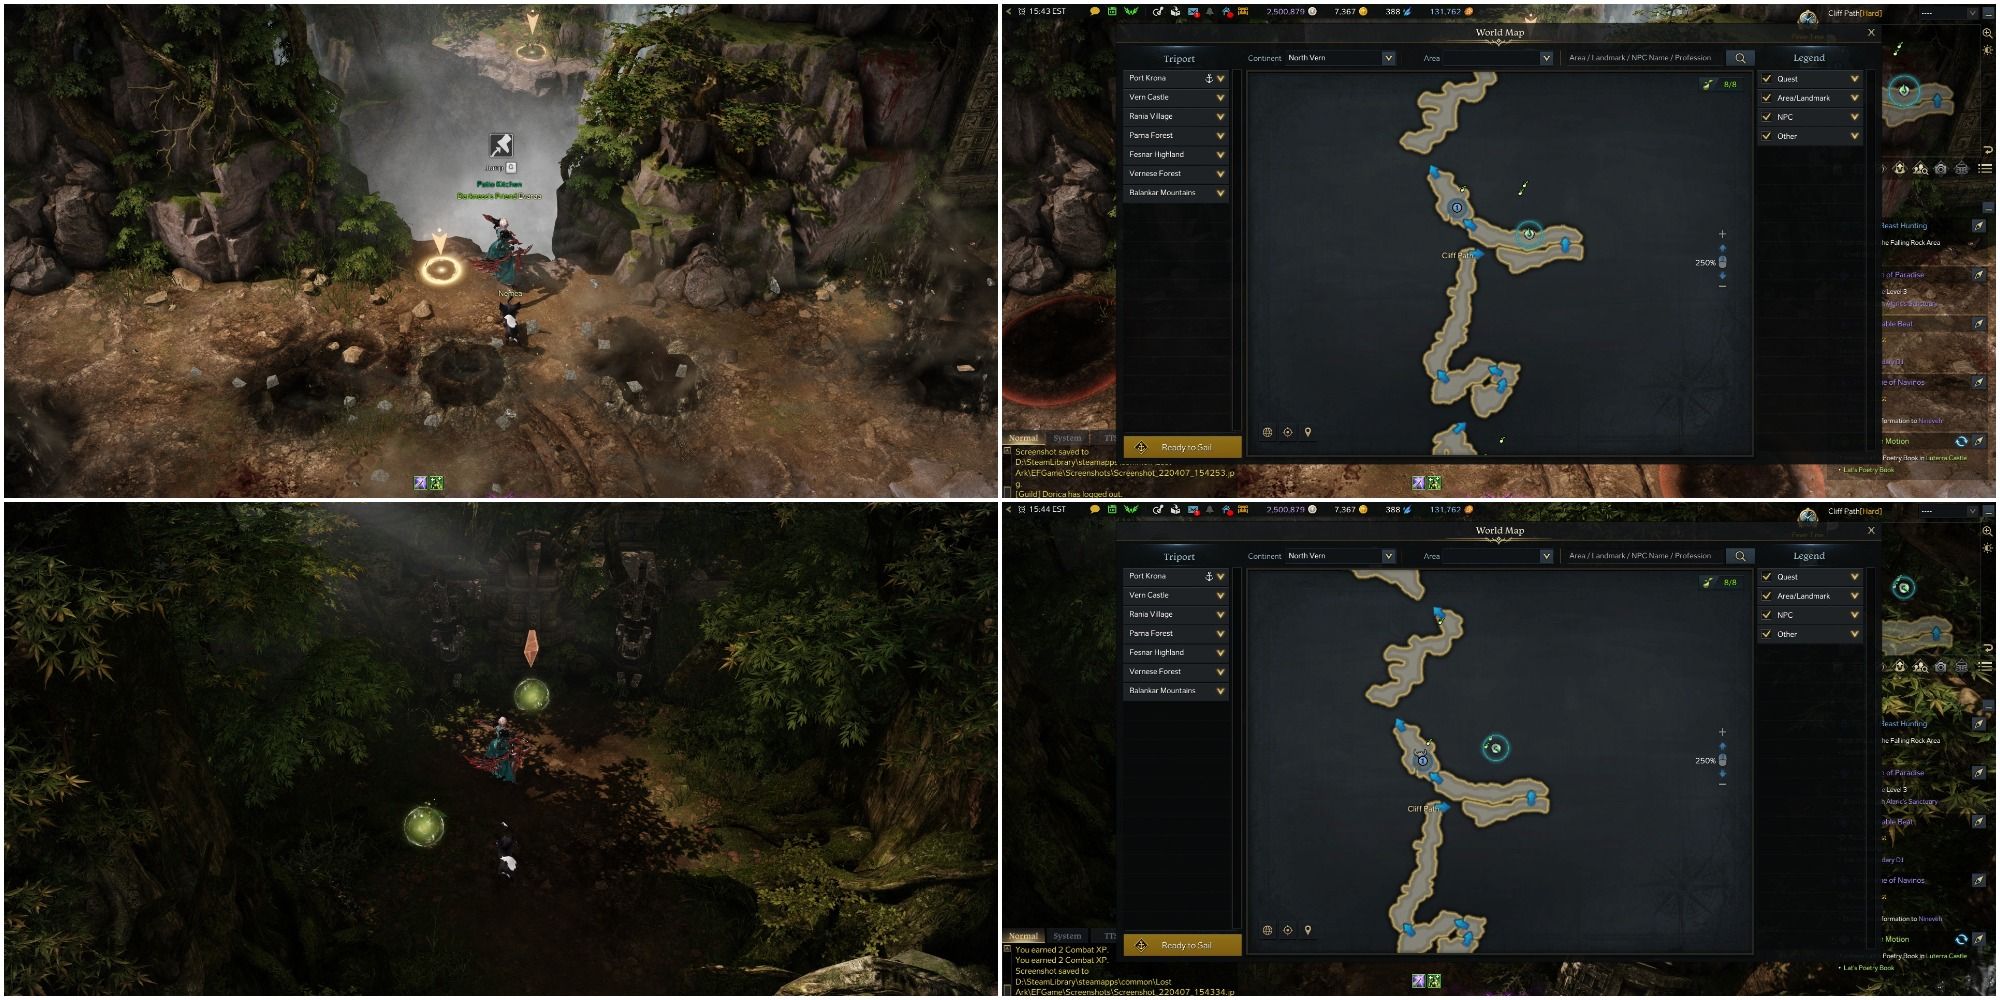 Lost Ark split image of Gorgon's Nest fifth and sixth Mokoko seeds and their map locations